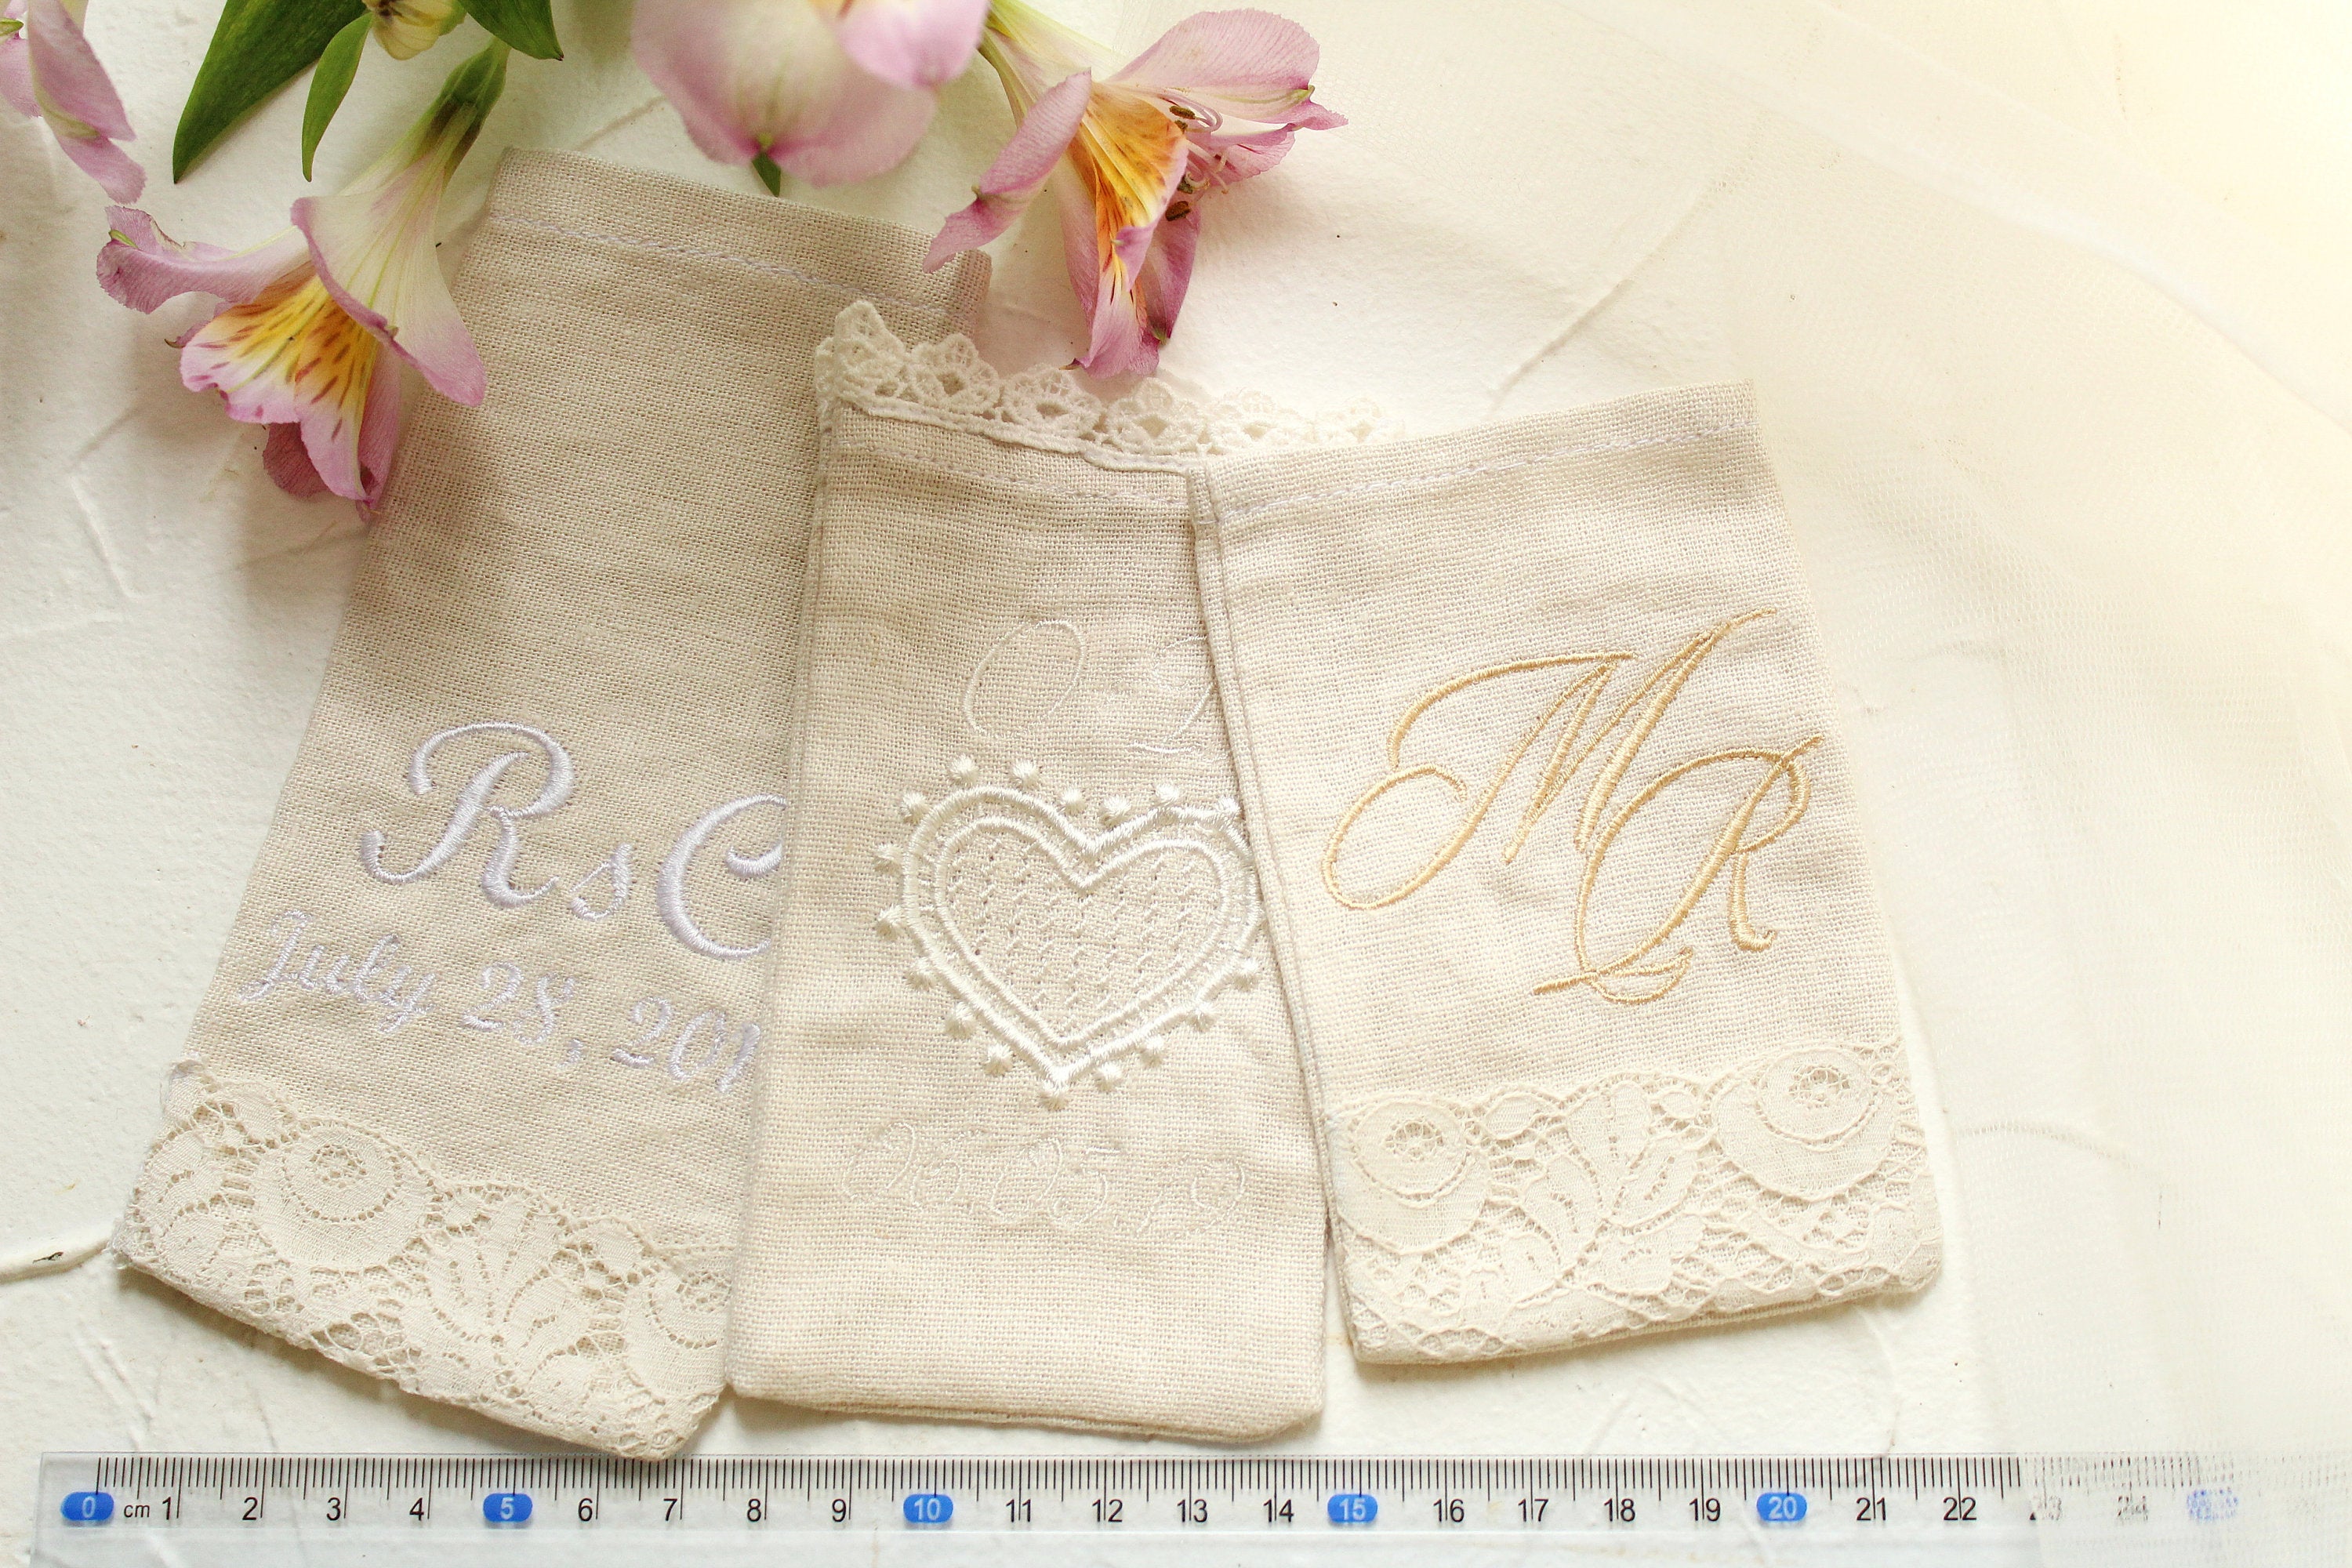 Personalized Wedding Favor Bags, Bridal Shower Favors Bag, Personalized Favors, Wedding Treat Bags, Rustic Gift Bag, Linen Favor Bags, Candy